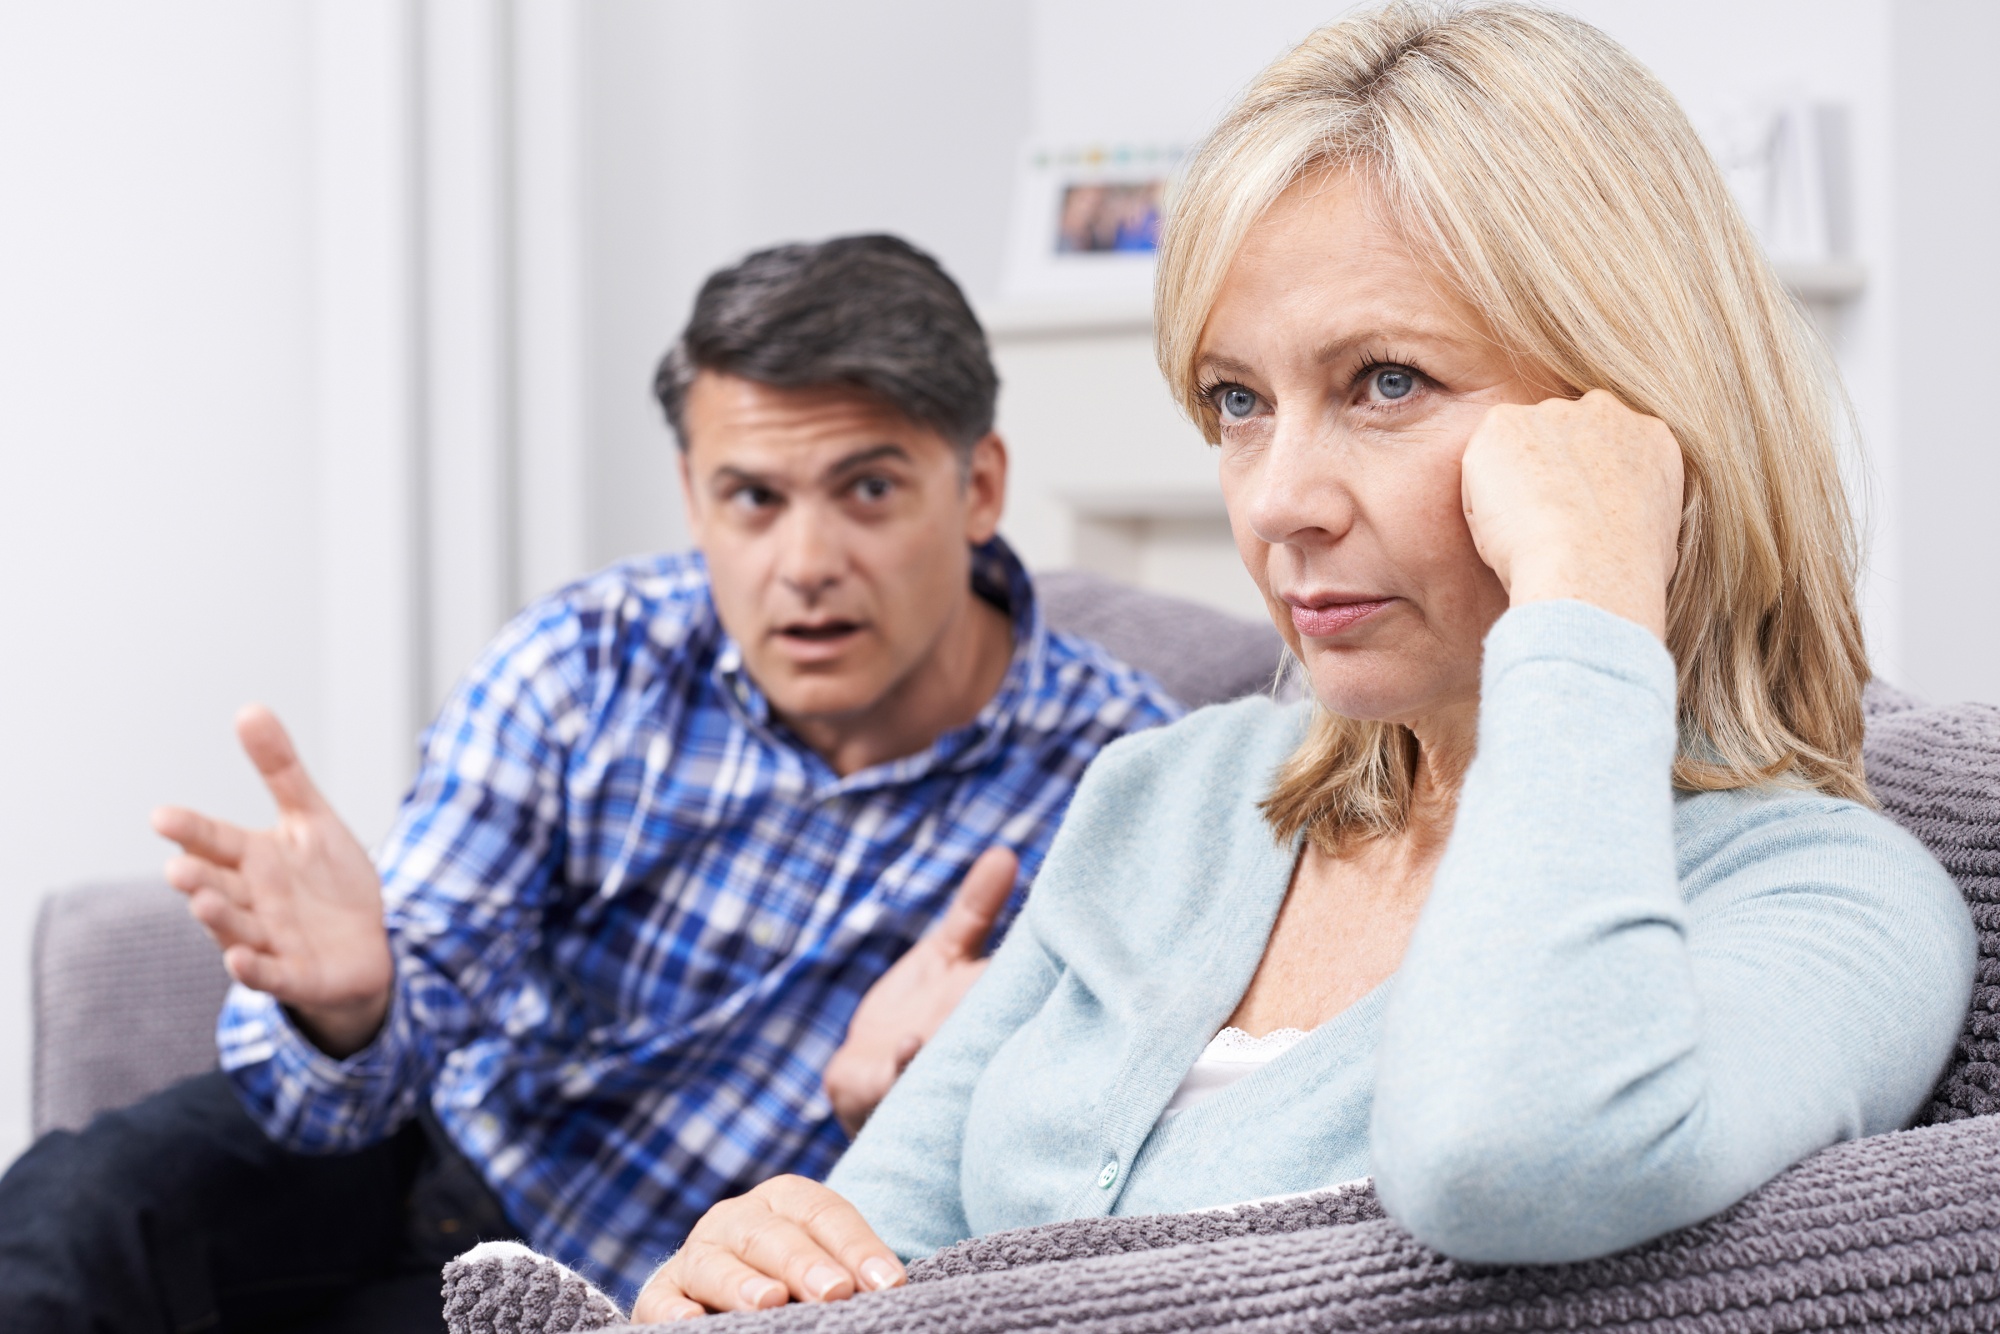 Toxic relationship habits, husband trying to talk to wife who is looking sad and ignoring him